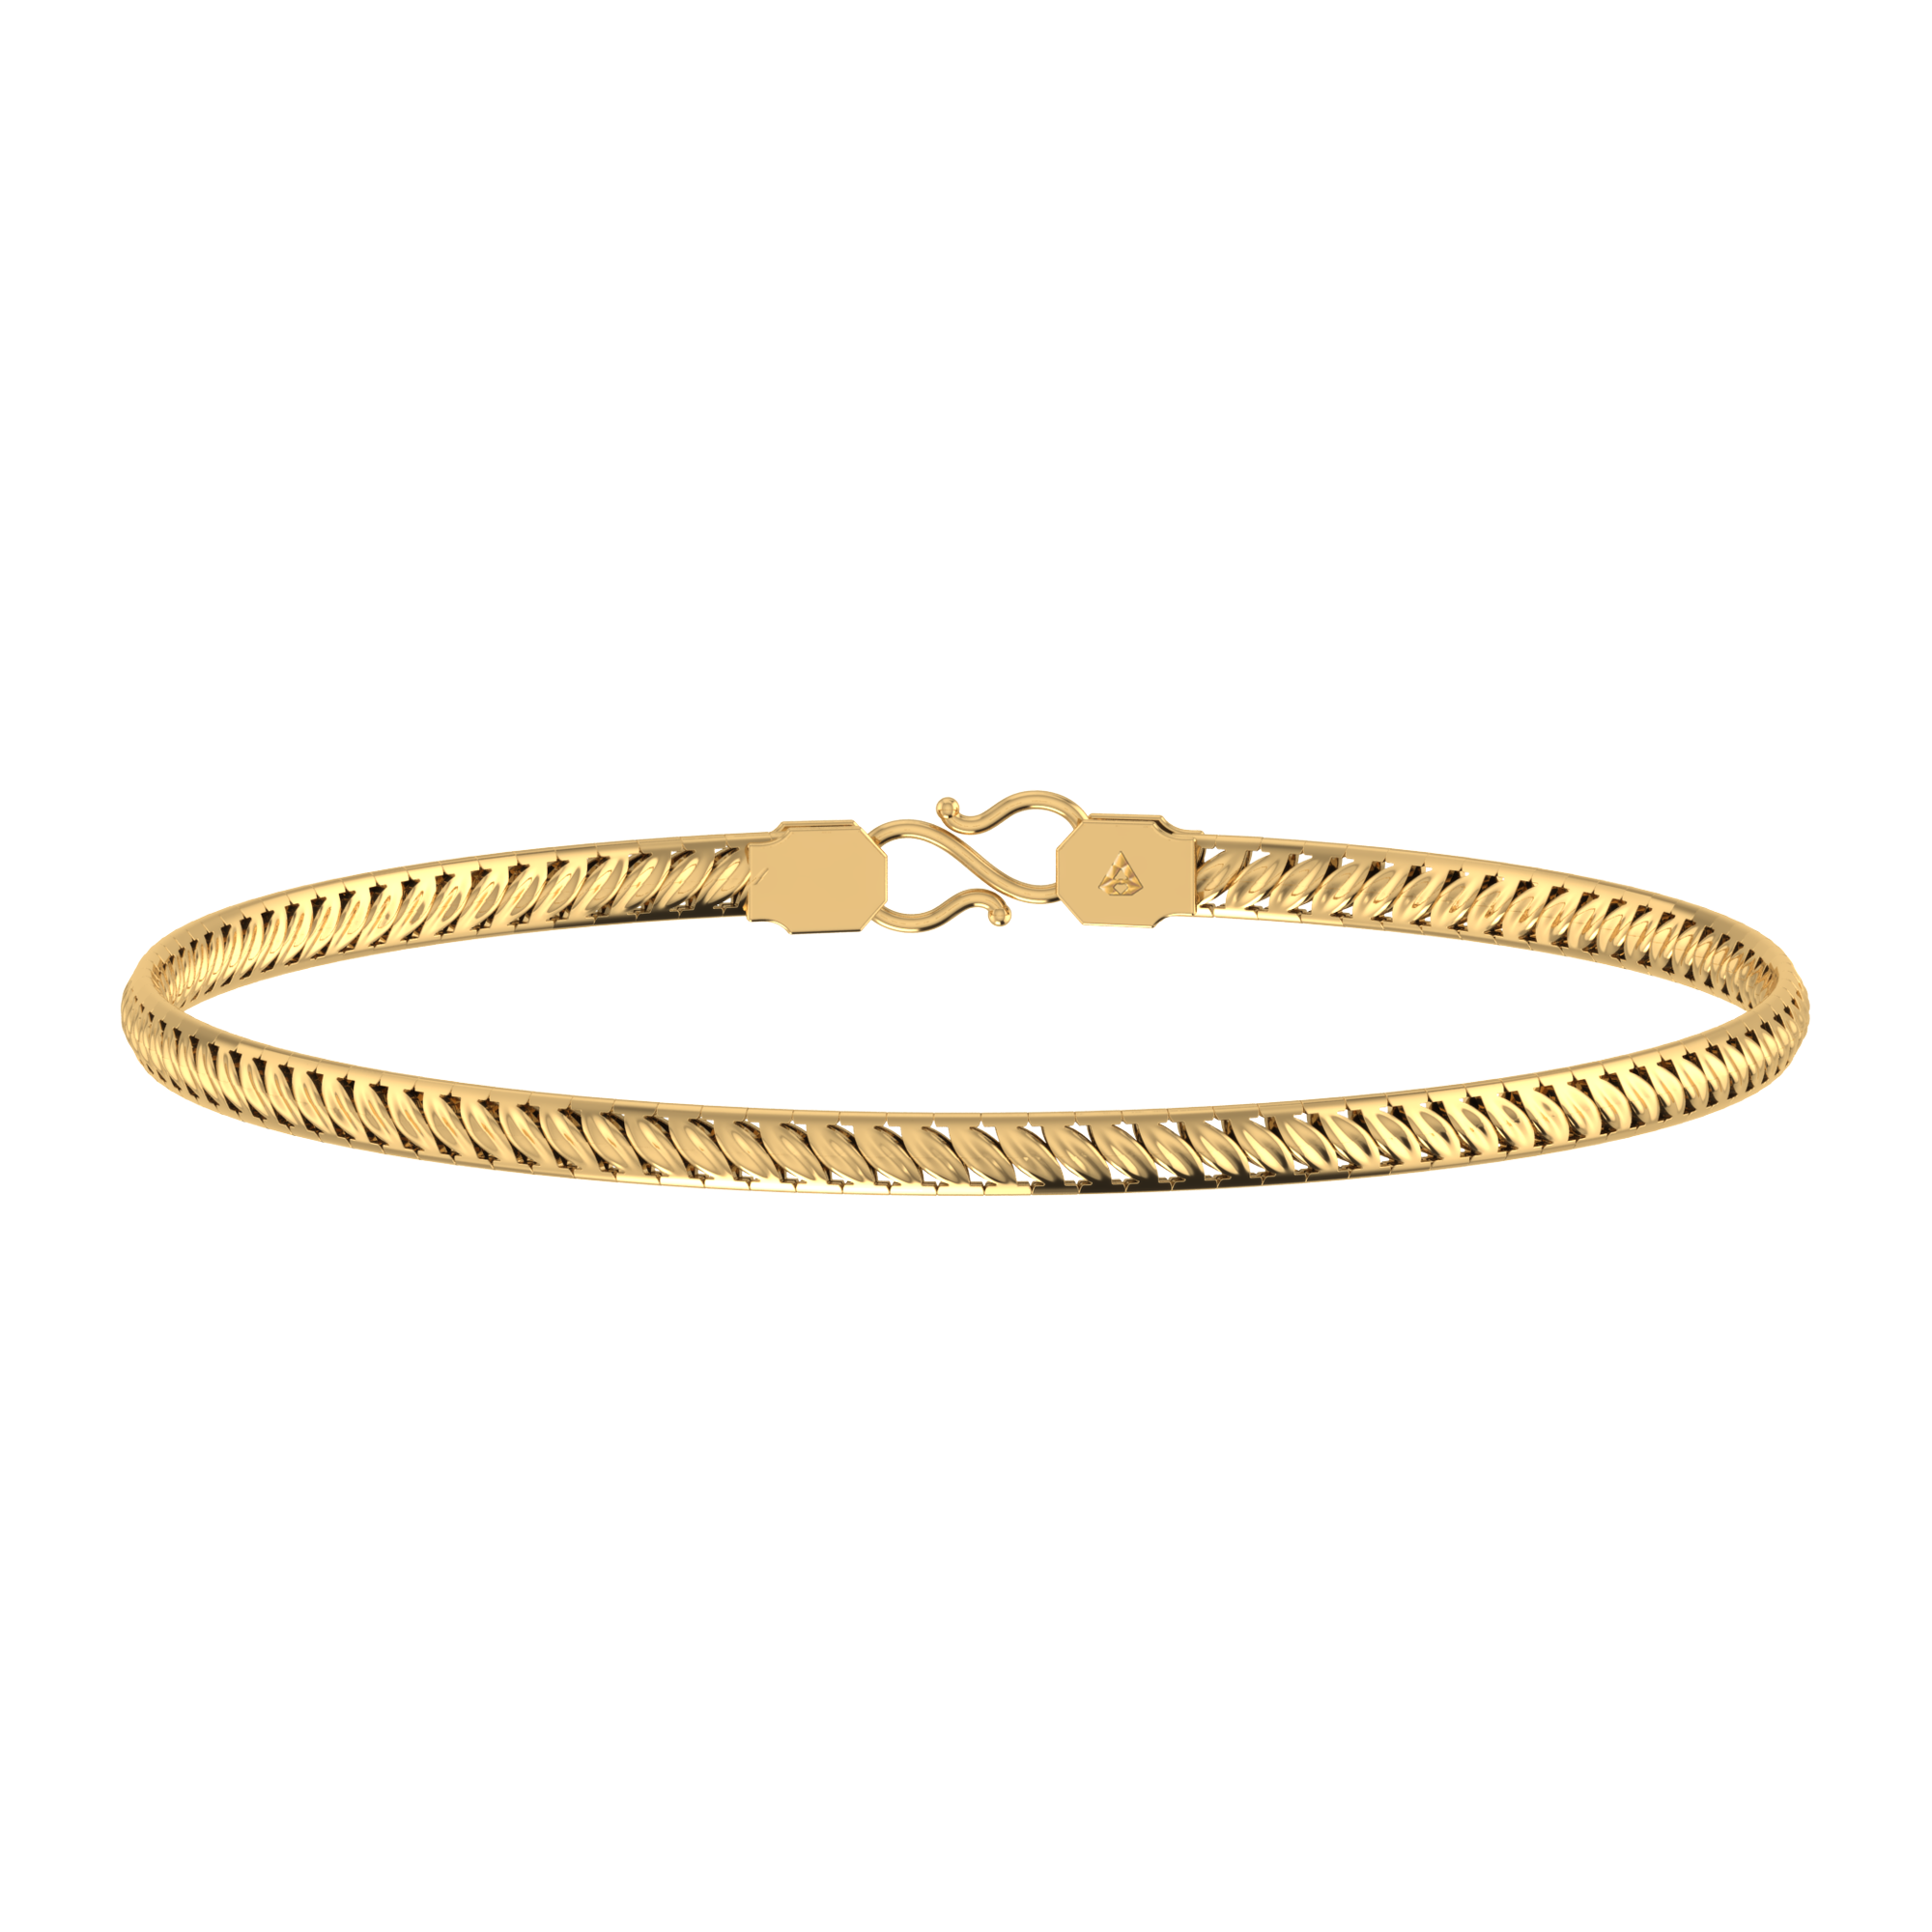 Stylish Mens Gold Plated Adjustable Latest Attractive Bracelet And Kada For  Men,Boys And Gift Purpose